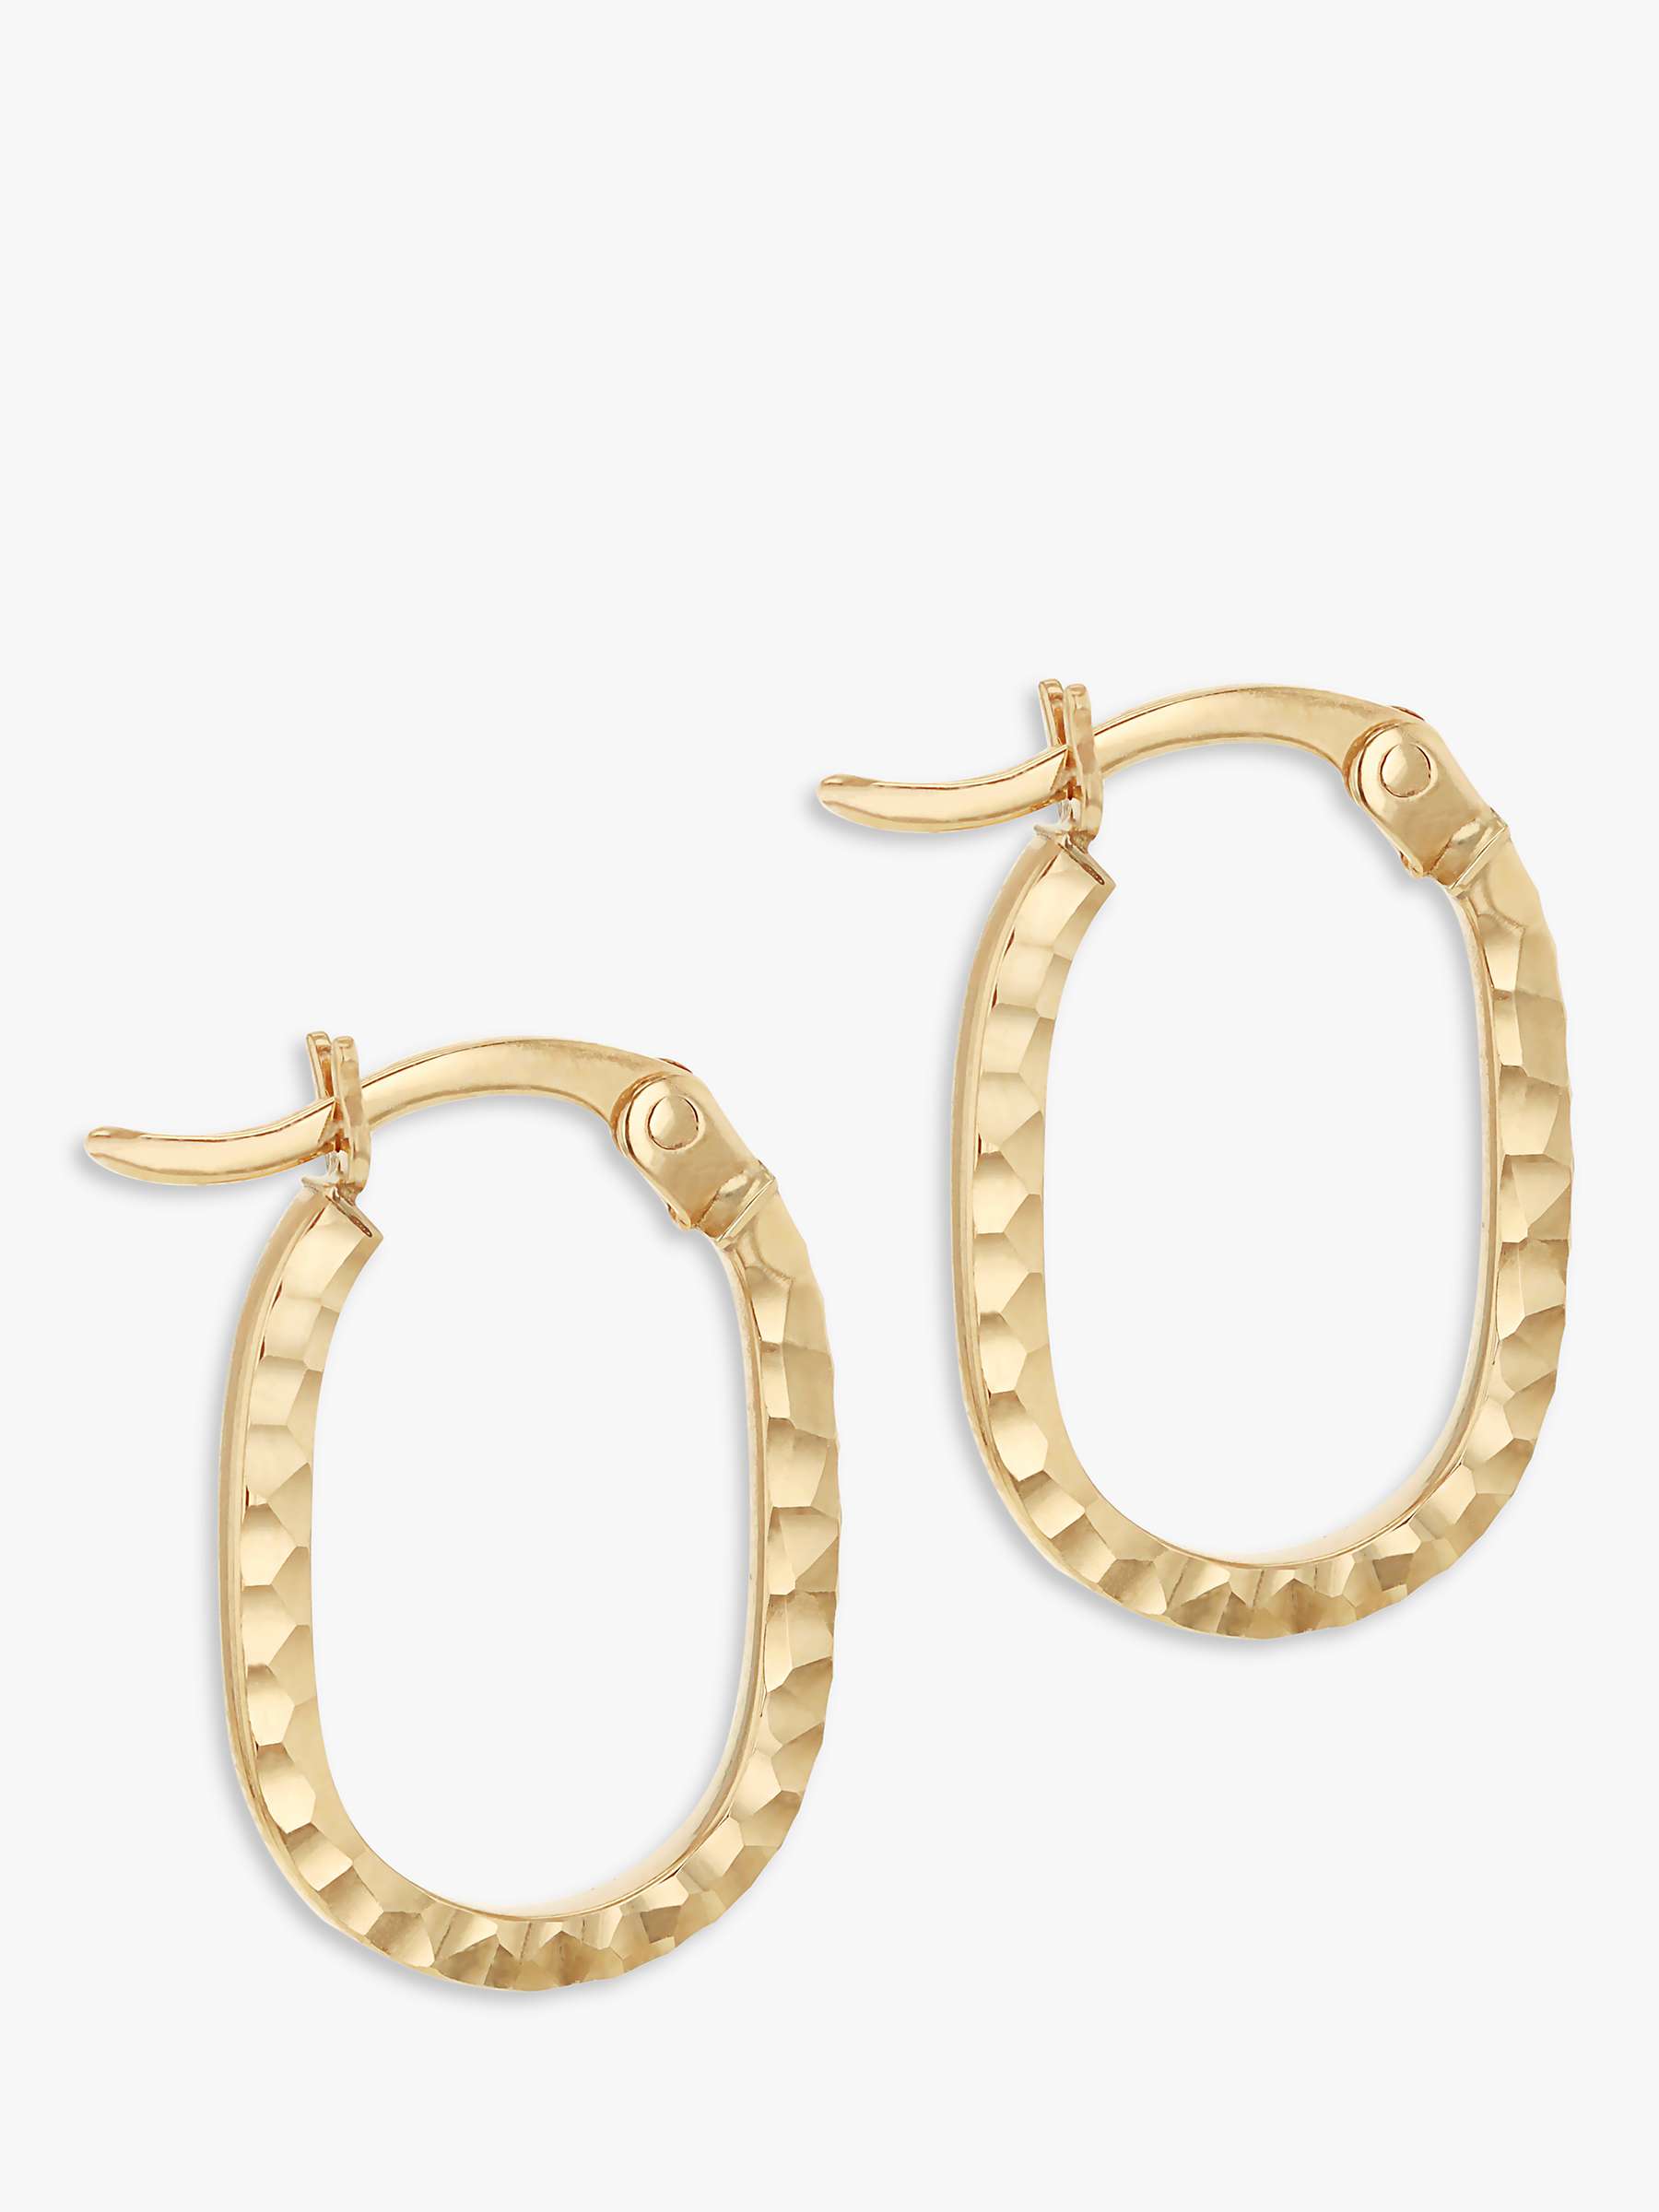 Buy IBB 9ct Small Faceted Oval Hoop Earrings, Gold Online at johnlewis.com